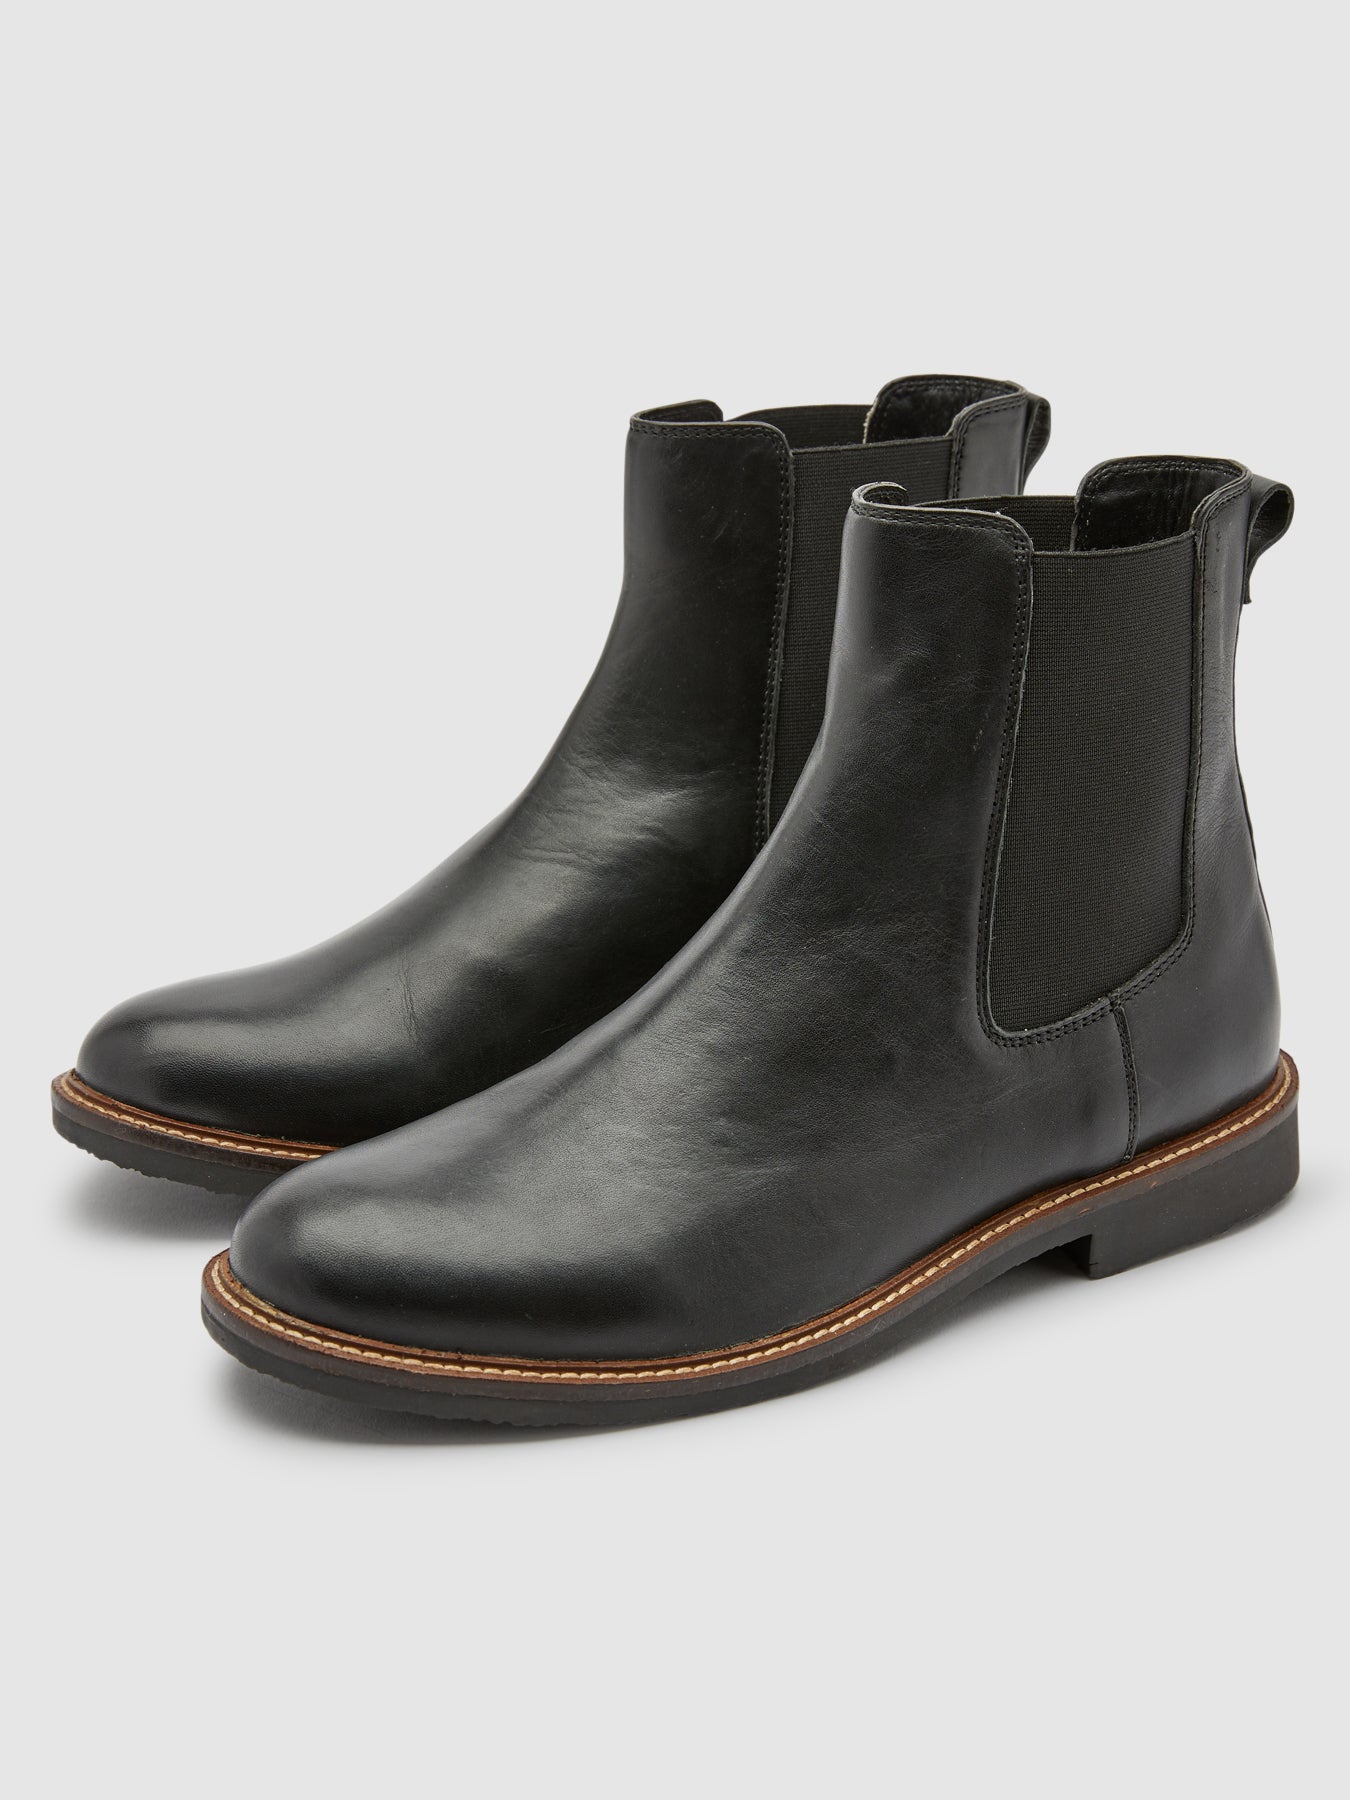 View Mansfield Leather Chelsea Boot In Jet Black information